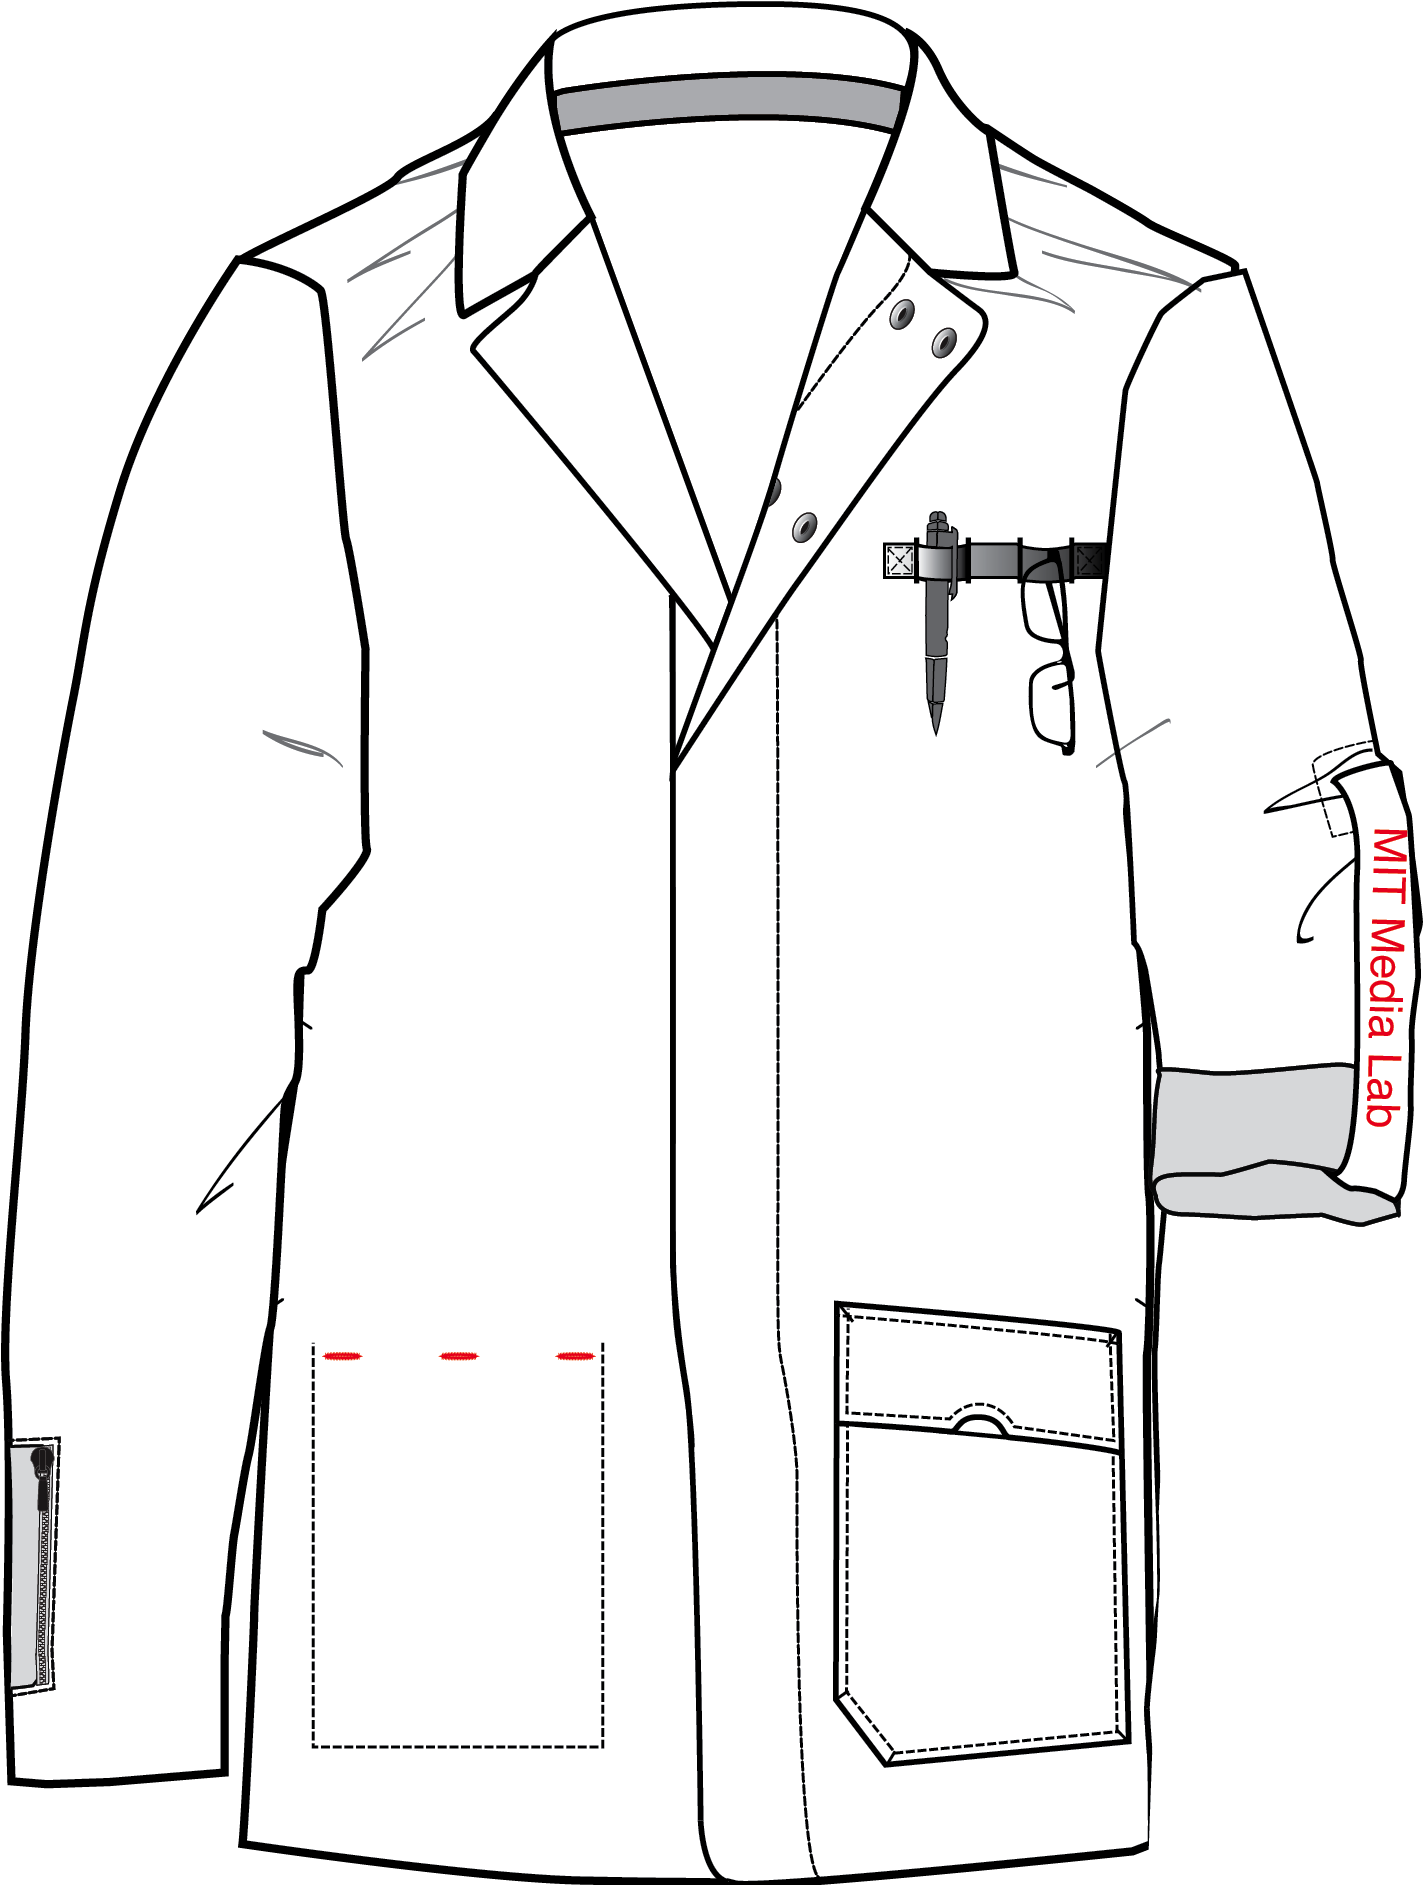 Download Images Of Lab Coat Drawing   Drawing Of A Lab Coat ...